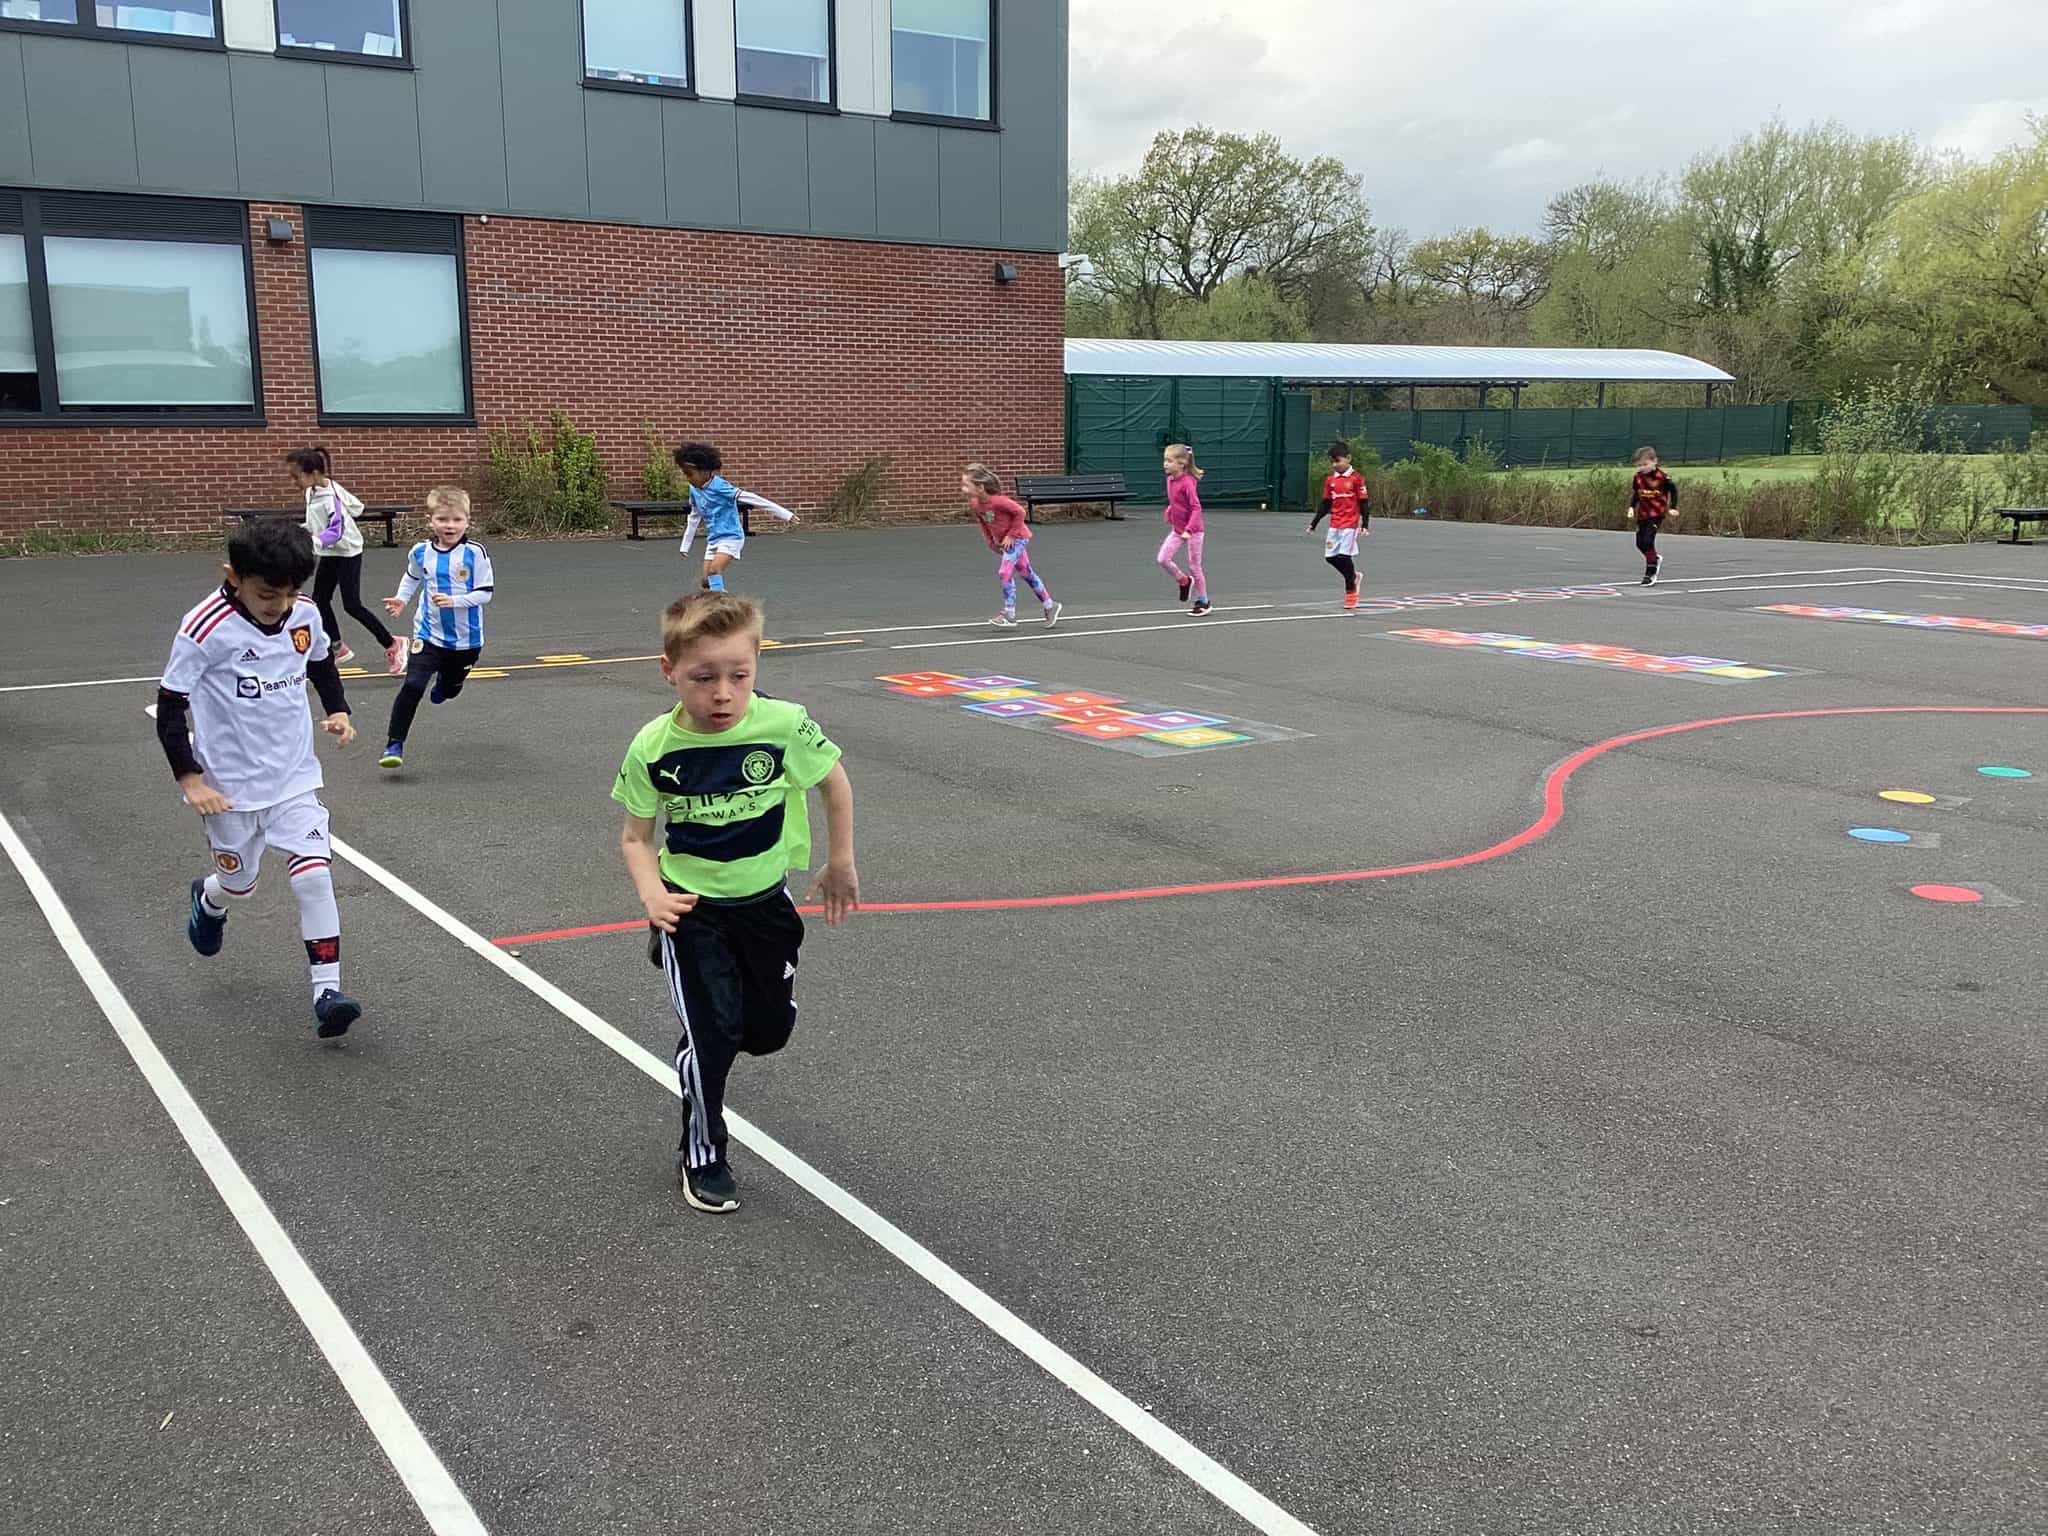 Year 2 pupils from Cheadle Hulme Primary School run along the playground track as they complete their section of the walk for the Together Trust